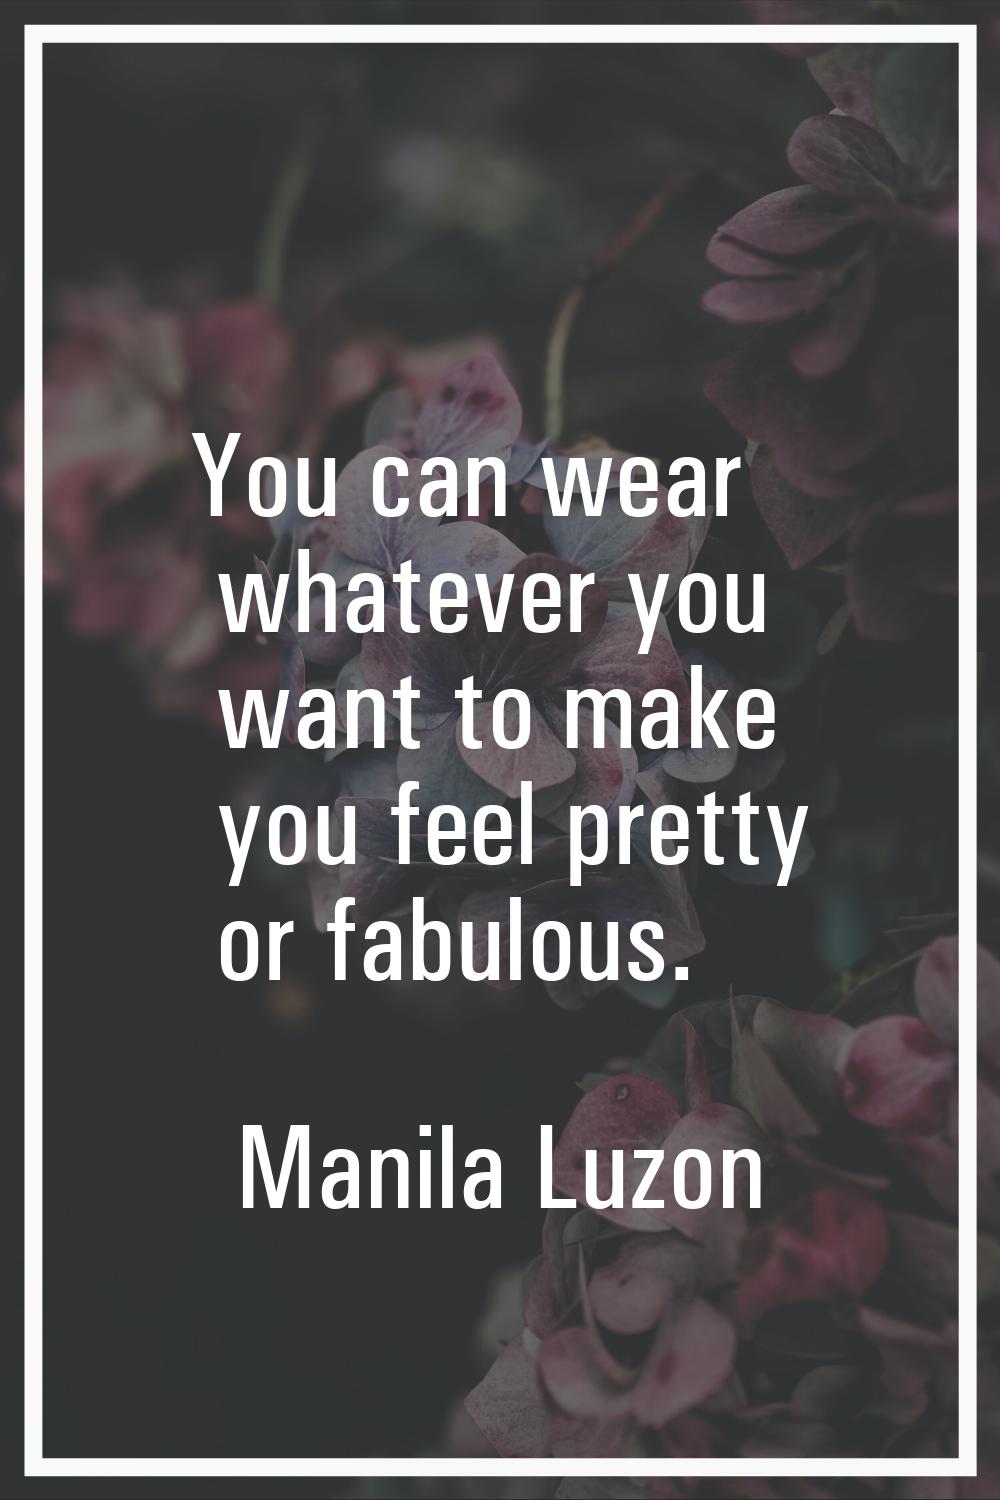 You can wear whatever you want to make you feel pretty or fabulous.